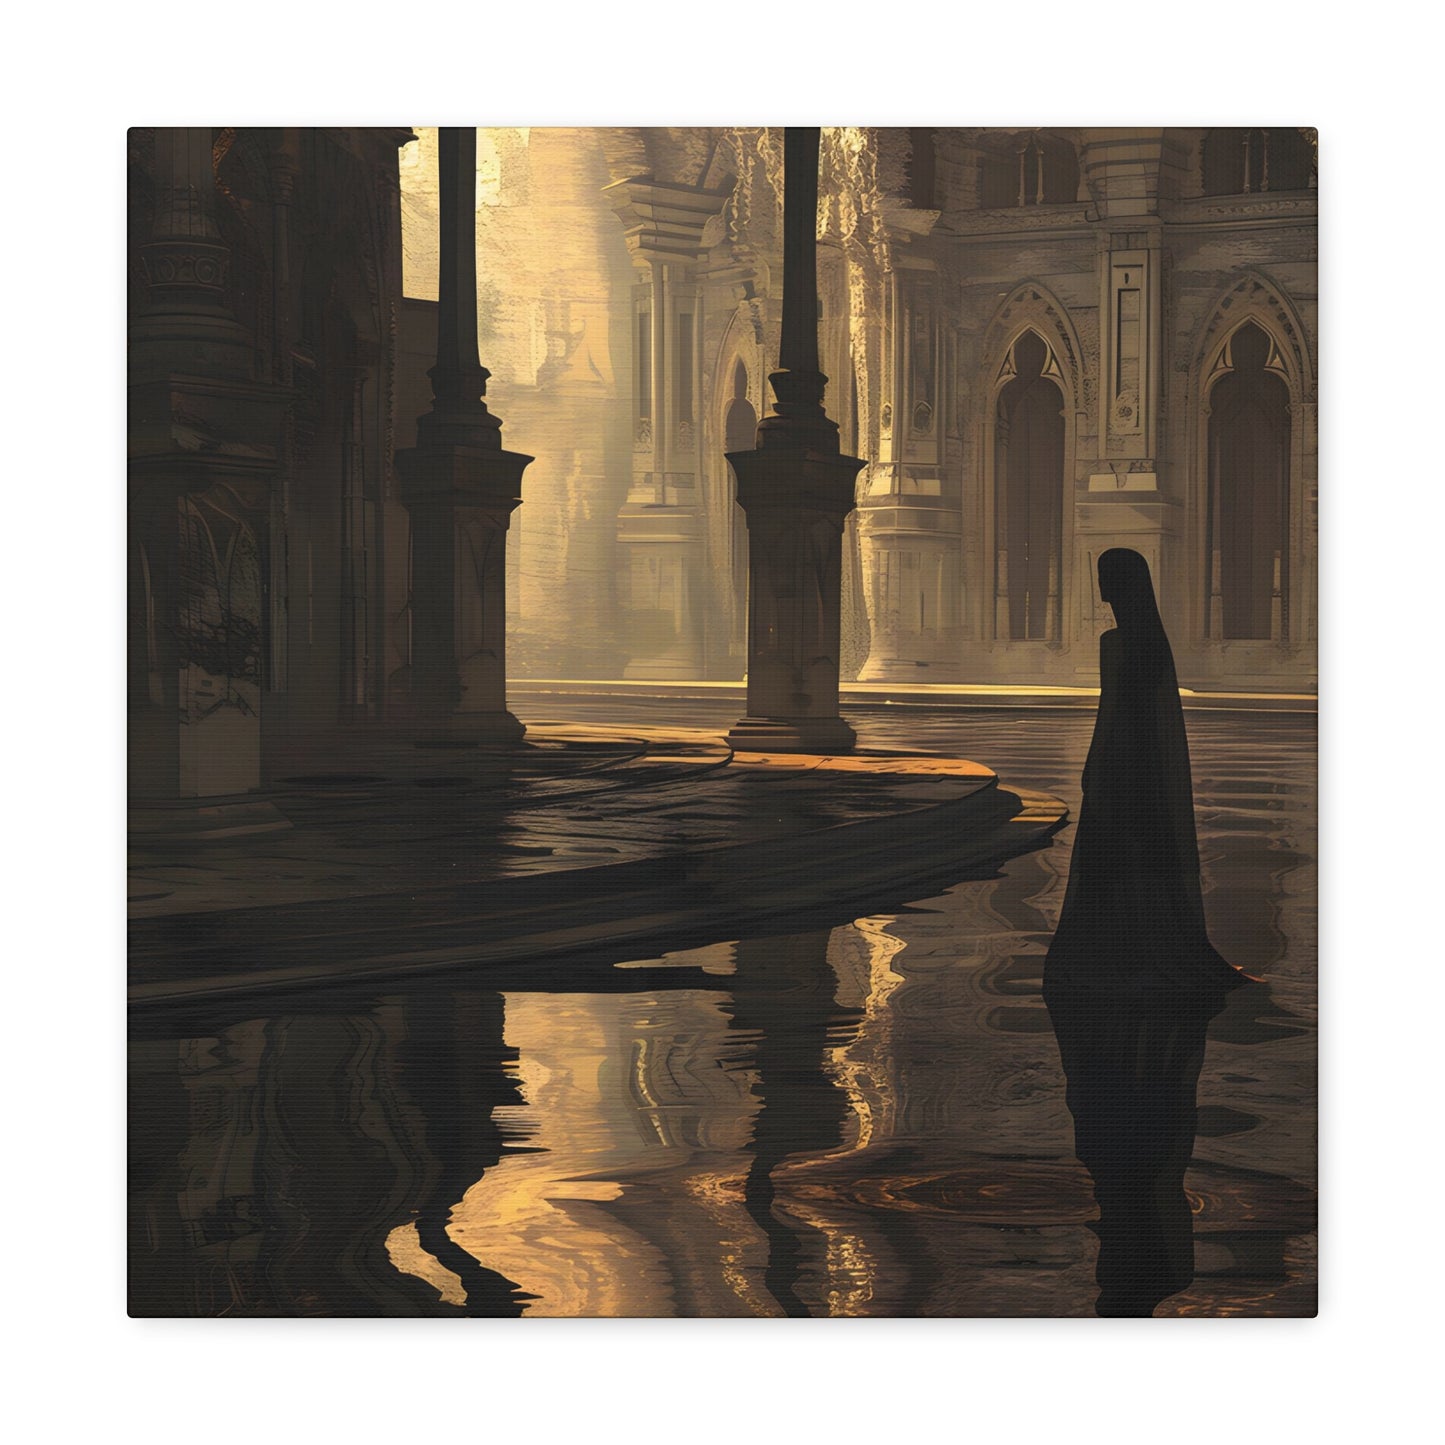 Artwork by Avery Pennington depicting a serene yet mystical scene of an ancient flooded cathedral under the golden hues of fading sunlight. A solitary figure cloaked in black stands amidst Gothic architecture, reflecting in the water alongside pillars and arches, creating a blend of reality and illusion. The divine light streaming through highlights the grandeur of the scene and casts an ethereal glow on the water, evoking a sense of solitude, introspection, and profound calm in a sacred, forgotten space.